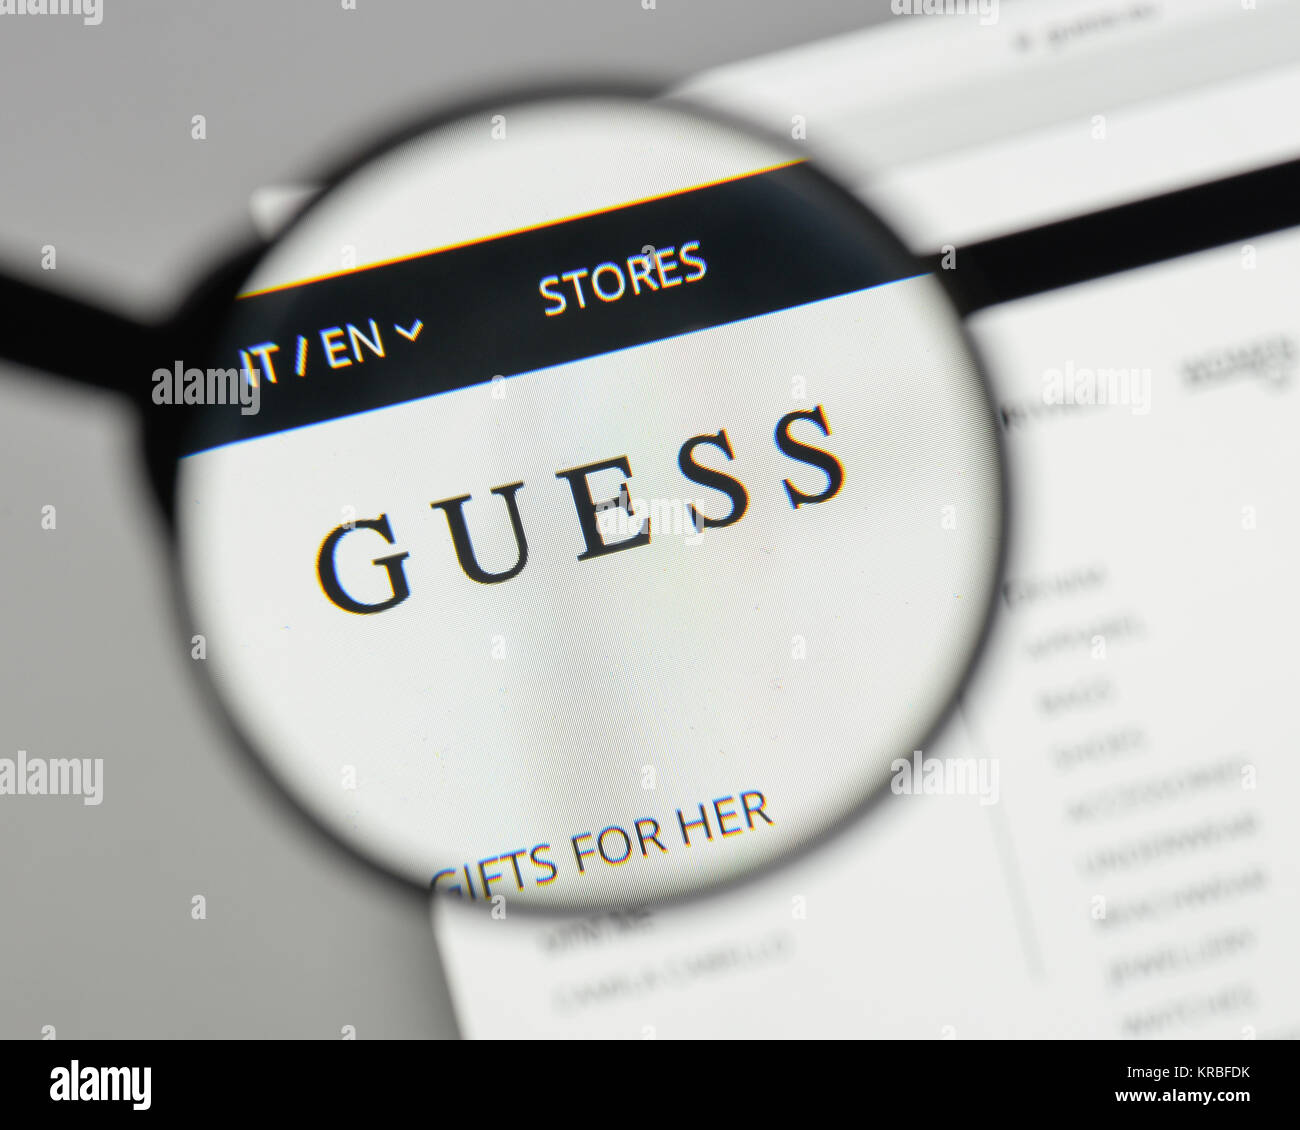 Guess High Resolution and Images Alamy